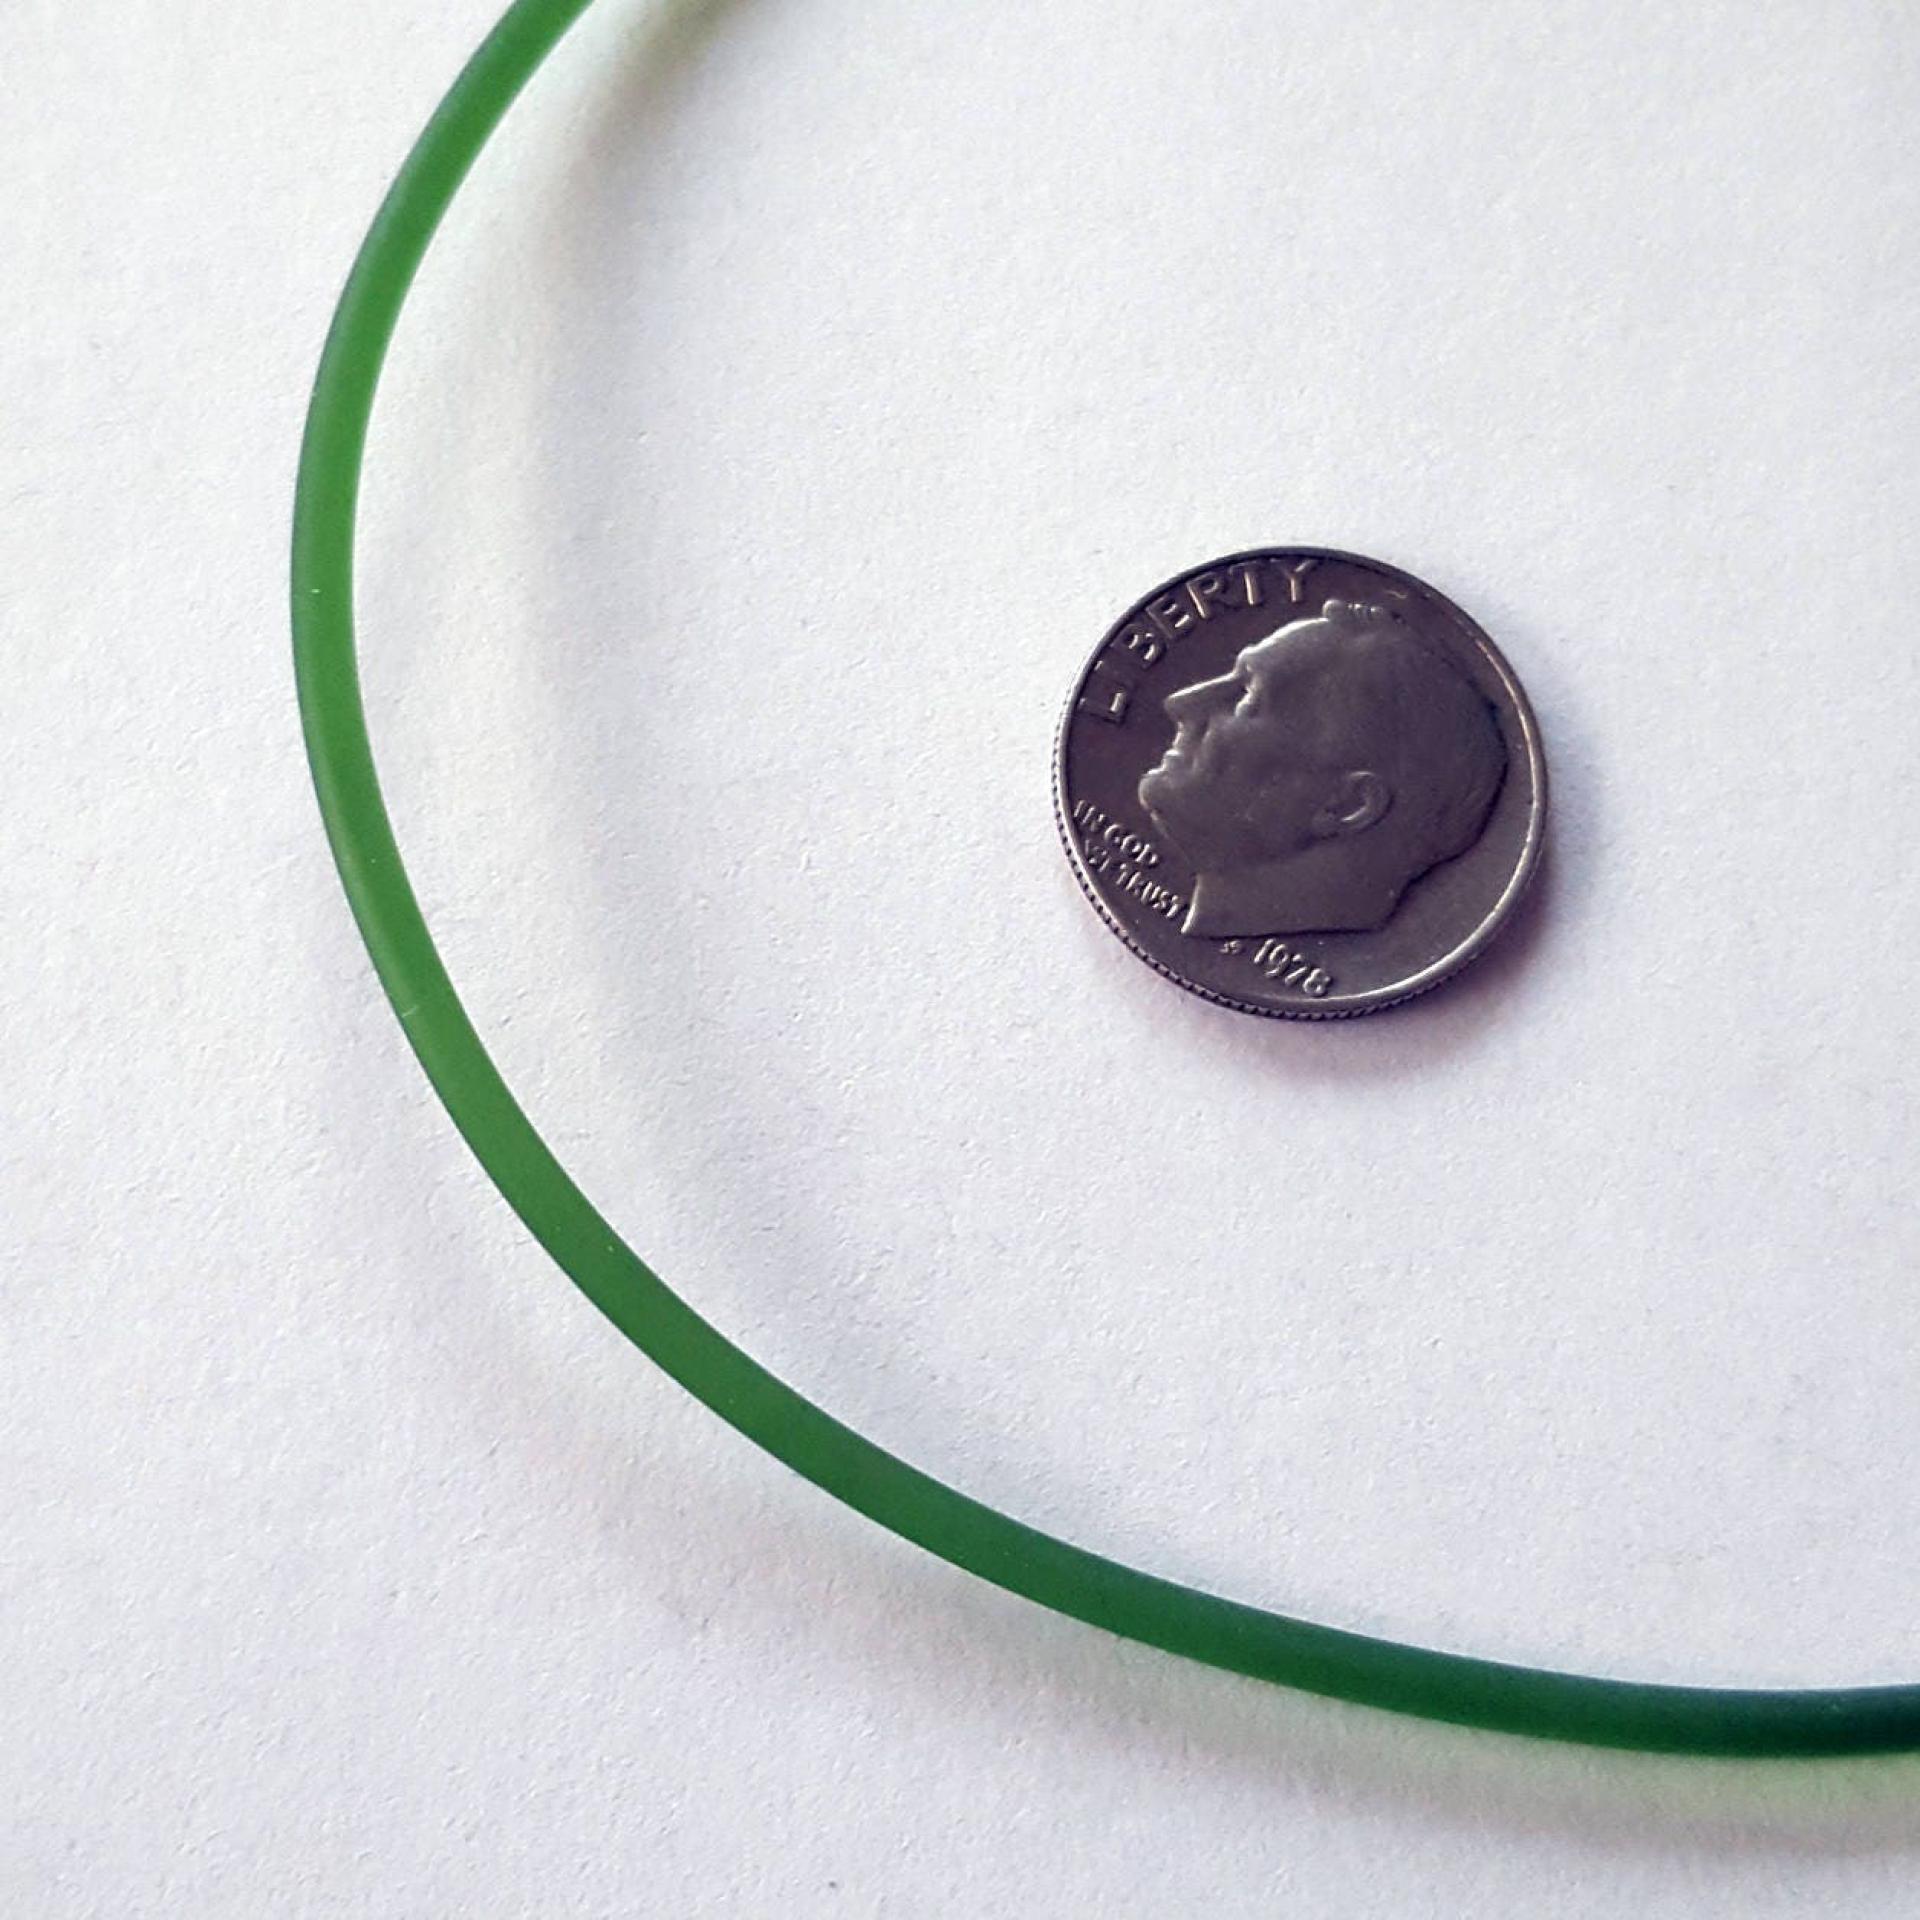 Green Rubber Cord Necklace, 2mm, Sterling Silver Clasp, Interchangeable, 16", 18", 20", 22", 24"